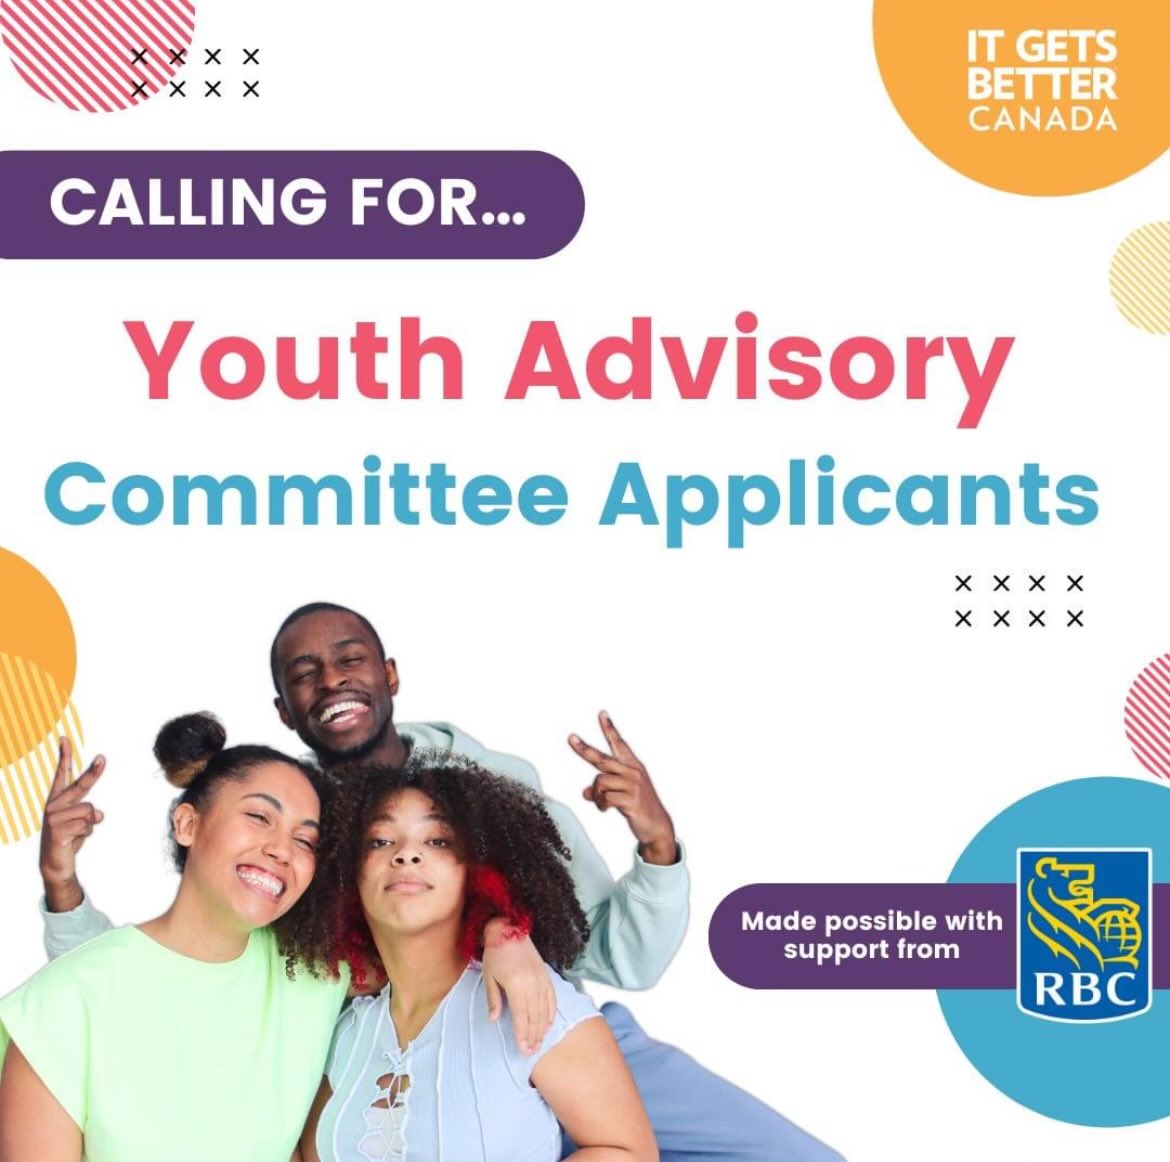 Paid opportunity for 2SLGBTQ+ youth ages 18-24
Join our Youth Advisory Committee and be the driving force behind positive change for 2SLGBTQ+ youth across Canada! https:// itgetsbettercanada.org/youth-
advisory-committee/ #YouthAdvisoryCommittee #ItGetsBetterCanada